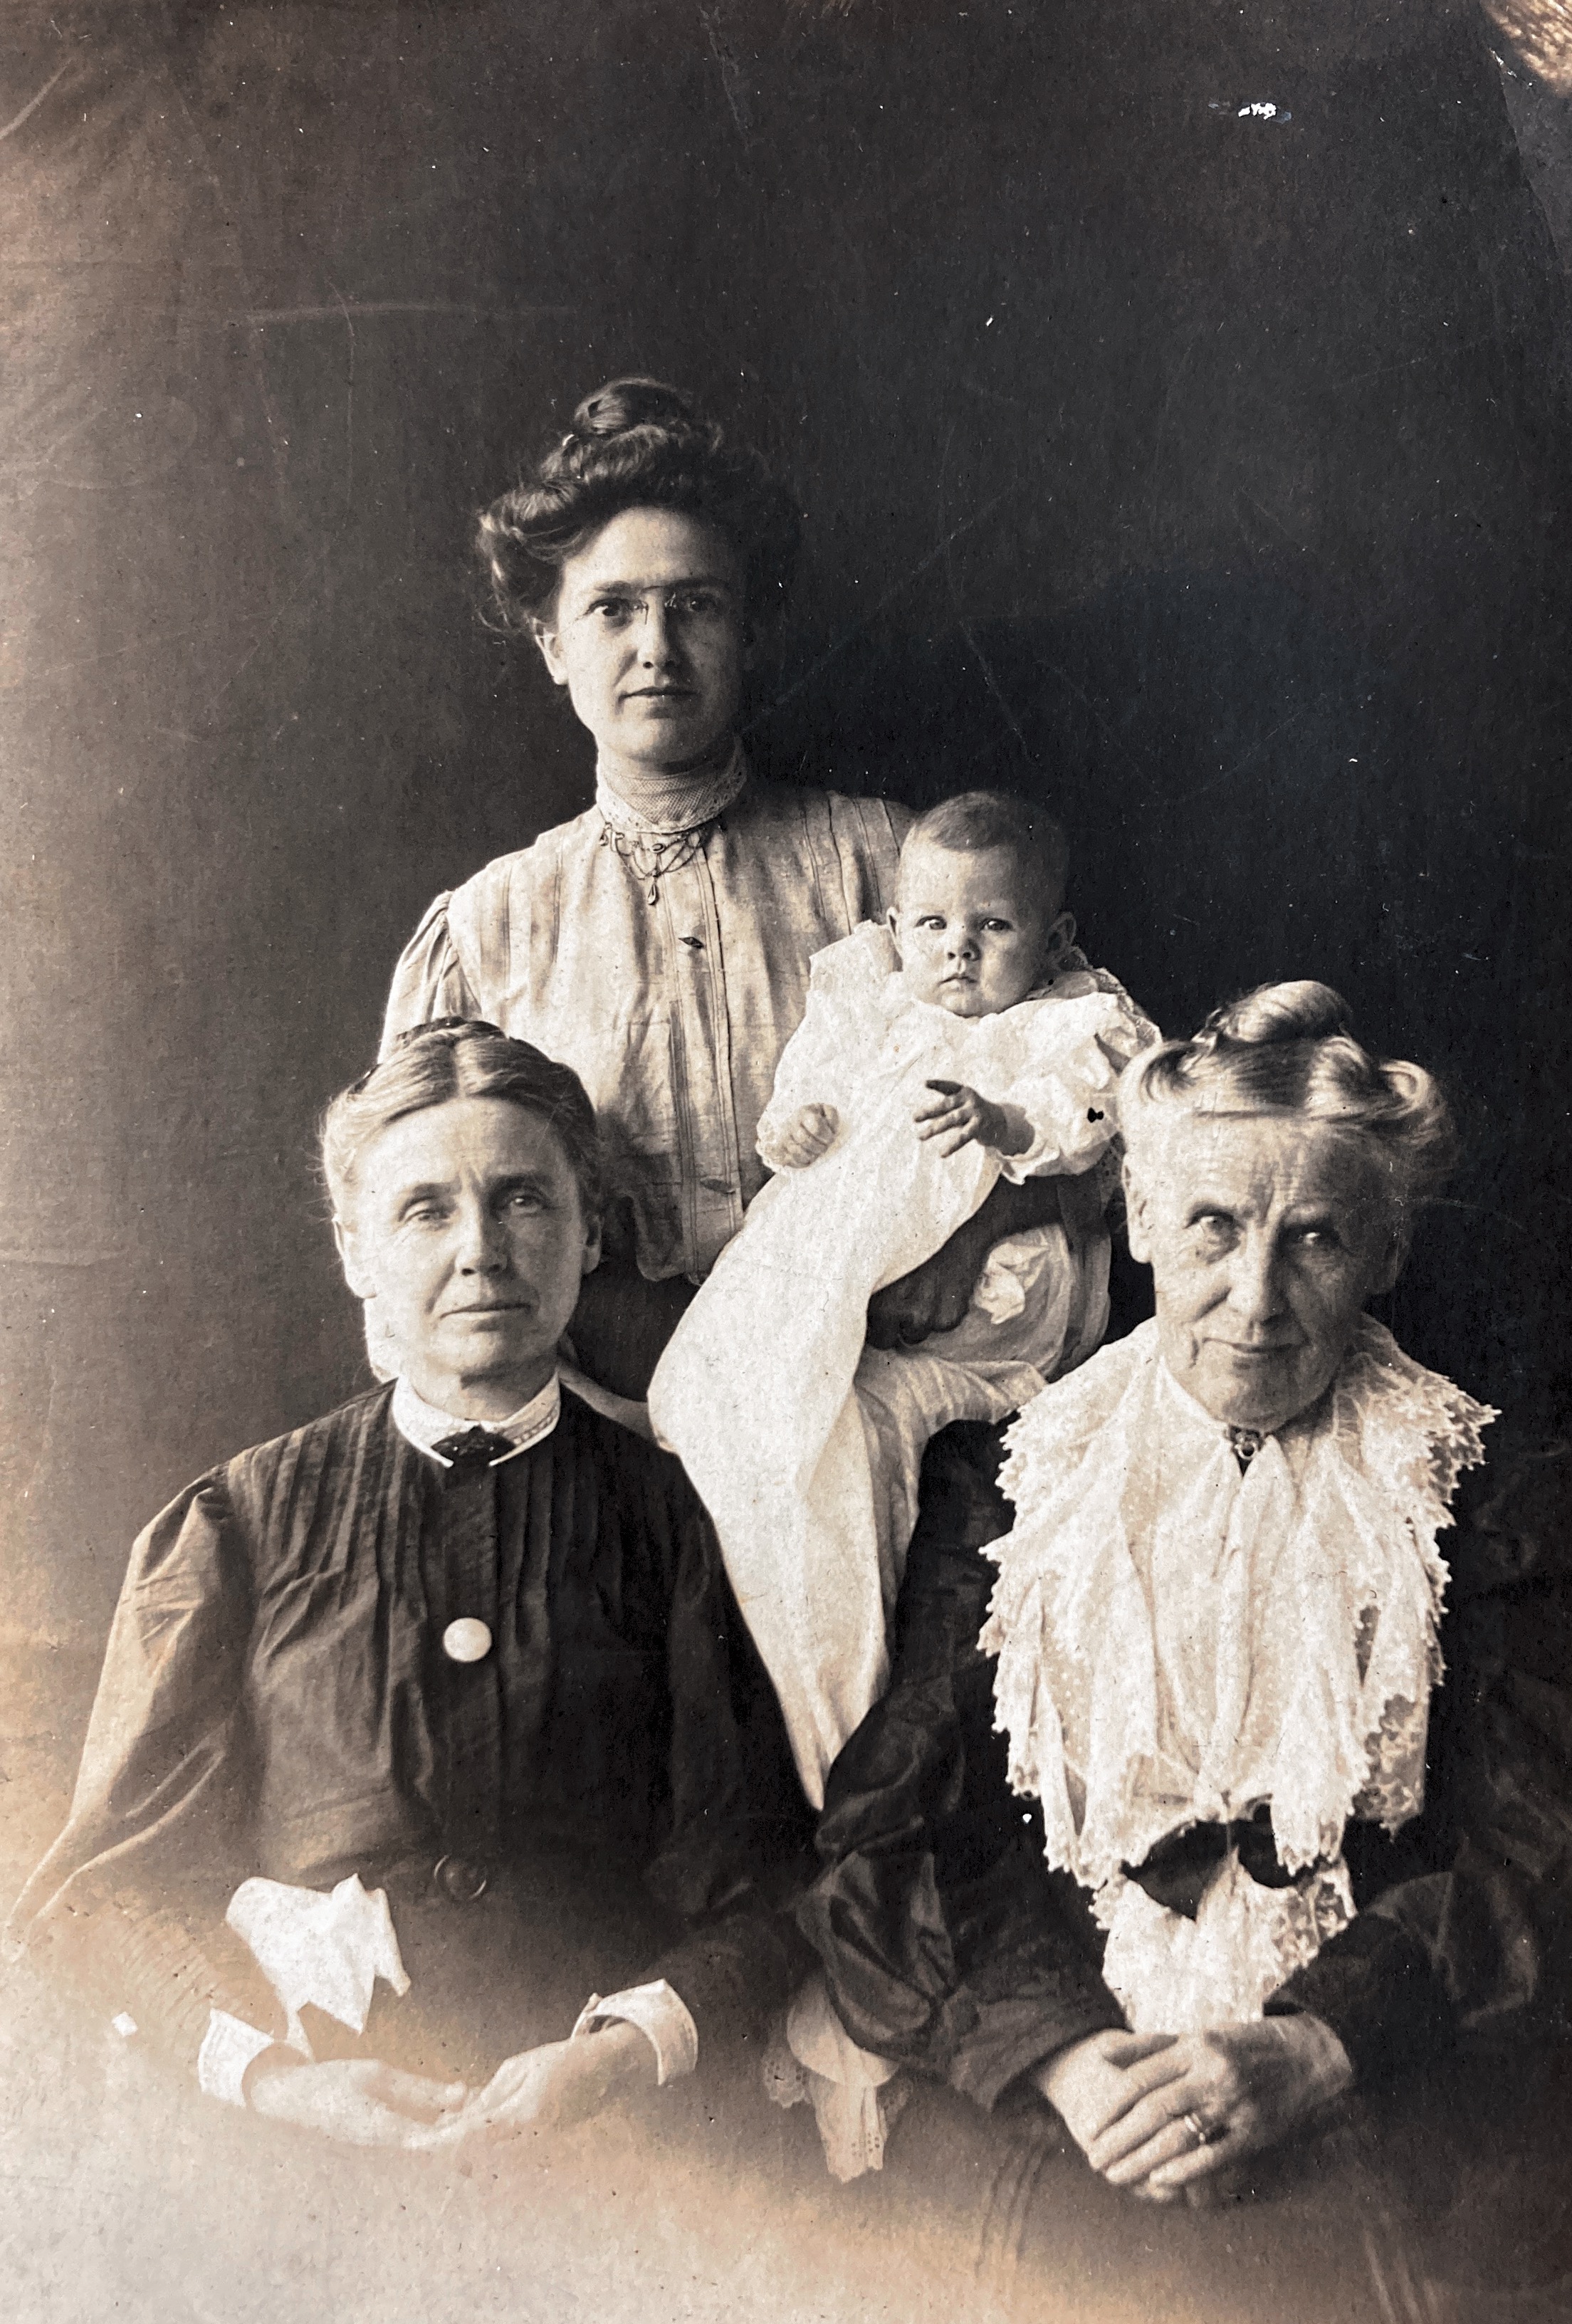 4 Generations. Baby-Miriam Keever, mother-Mary Keever, her mother-Myrtle Hunt, and her mother-Cornelia Bond. Taken 1907.